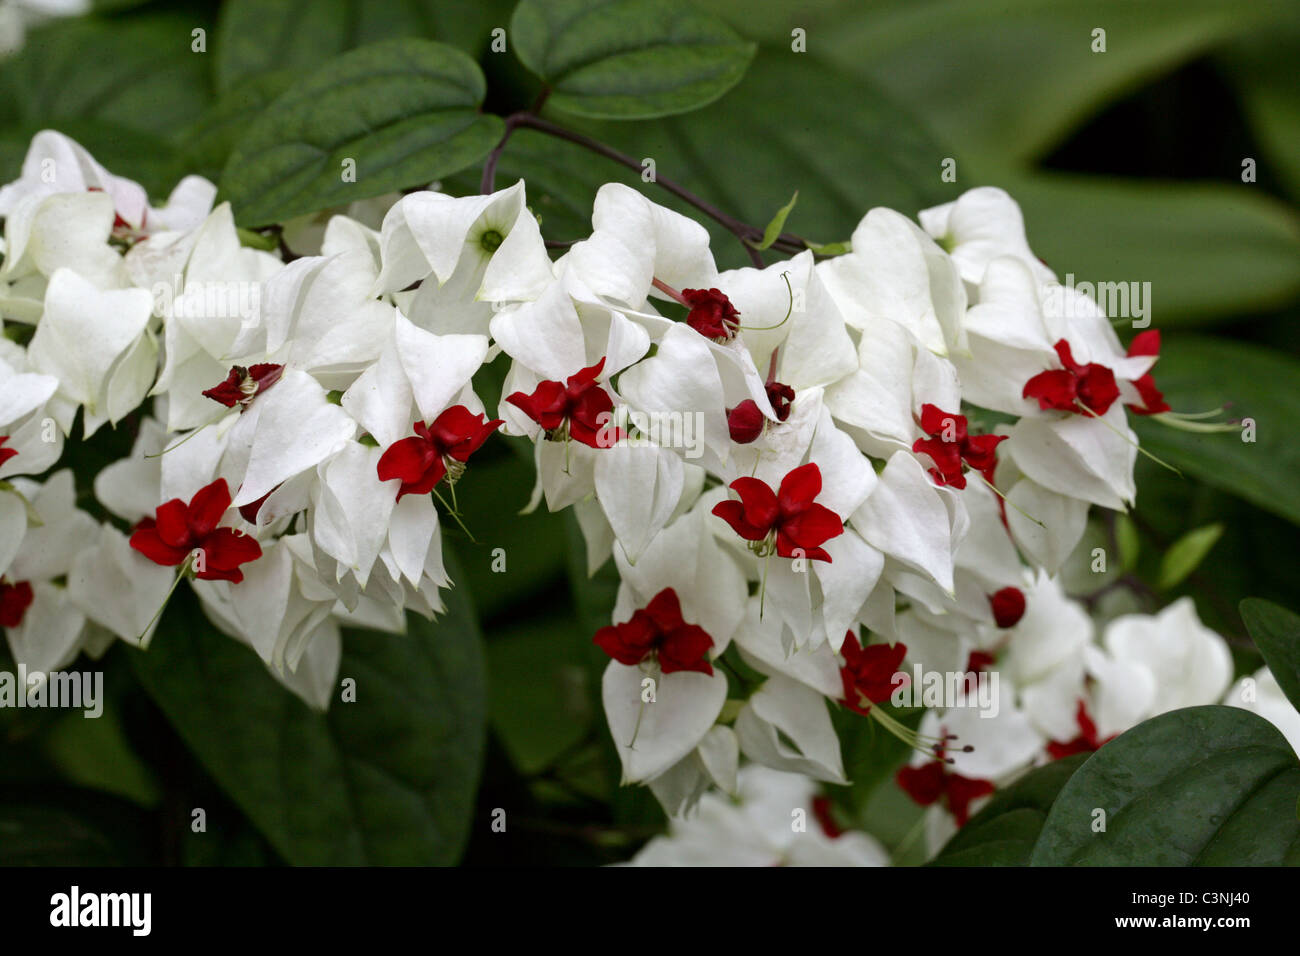 Bleeding Heart or Bleeding Heart Vine, Clerodendron or Glory Bower, Clerodendrum thomsonii (Clerodendrum thomsoniae), Lamiaceae. Stock Photo